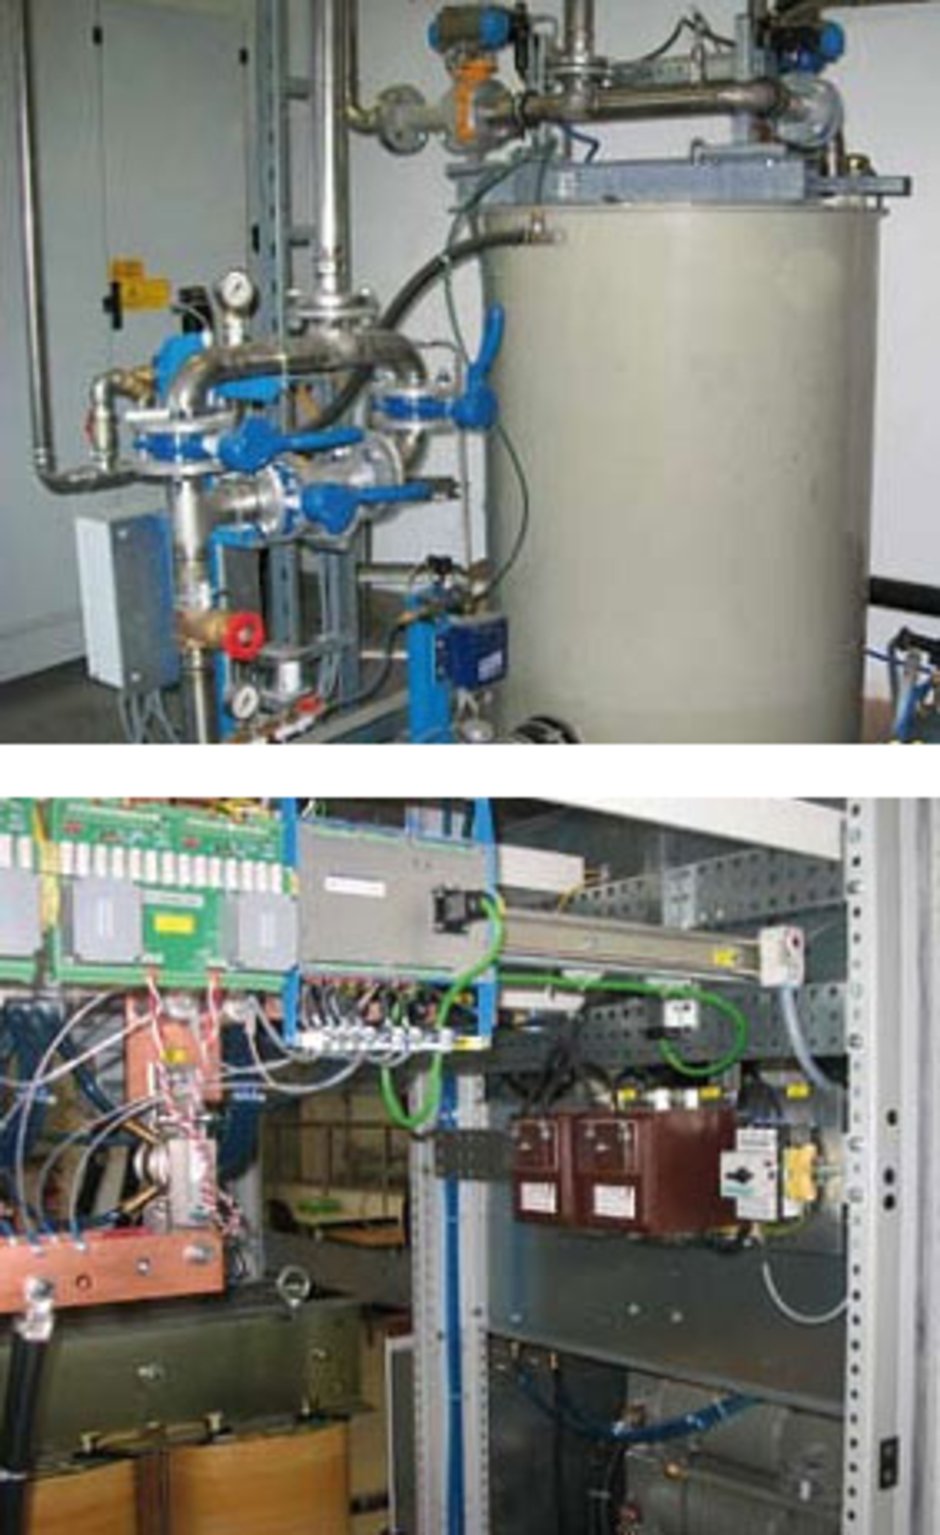 The new units: water recooler and switchgear system